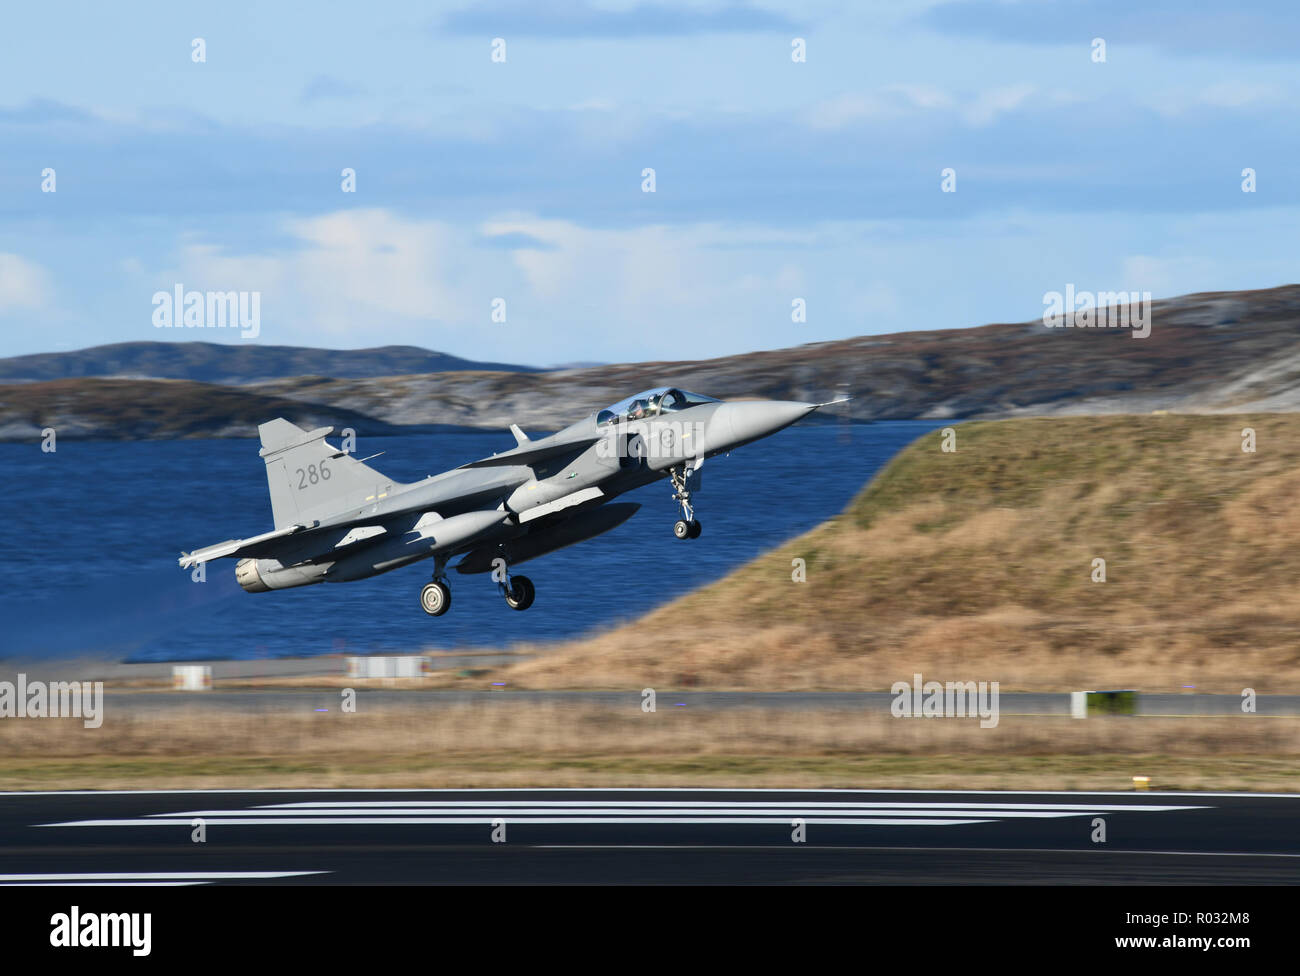 A Swedish Air Force JAS 39 Gripen lands at Bodo Air Station, Norway during exercise Trident Juncture 18 on Oct 25, 2018. Trident Juncture is a multinational NATO exercise that enhances professional relationships and improves overall coordination with Allied and partner nations. (photo by Louise Levin/Försvarsmakten) Stock Photo